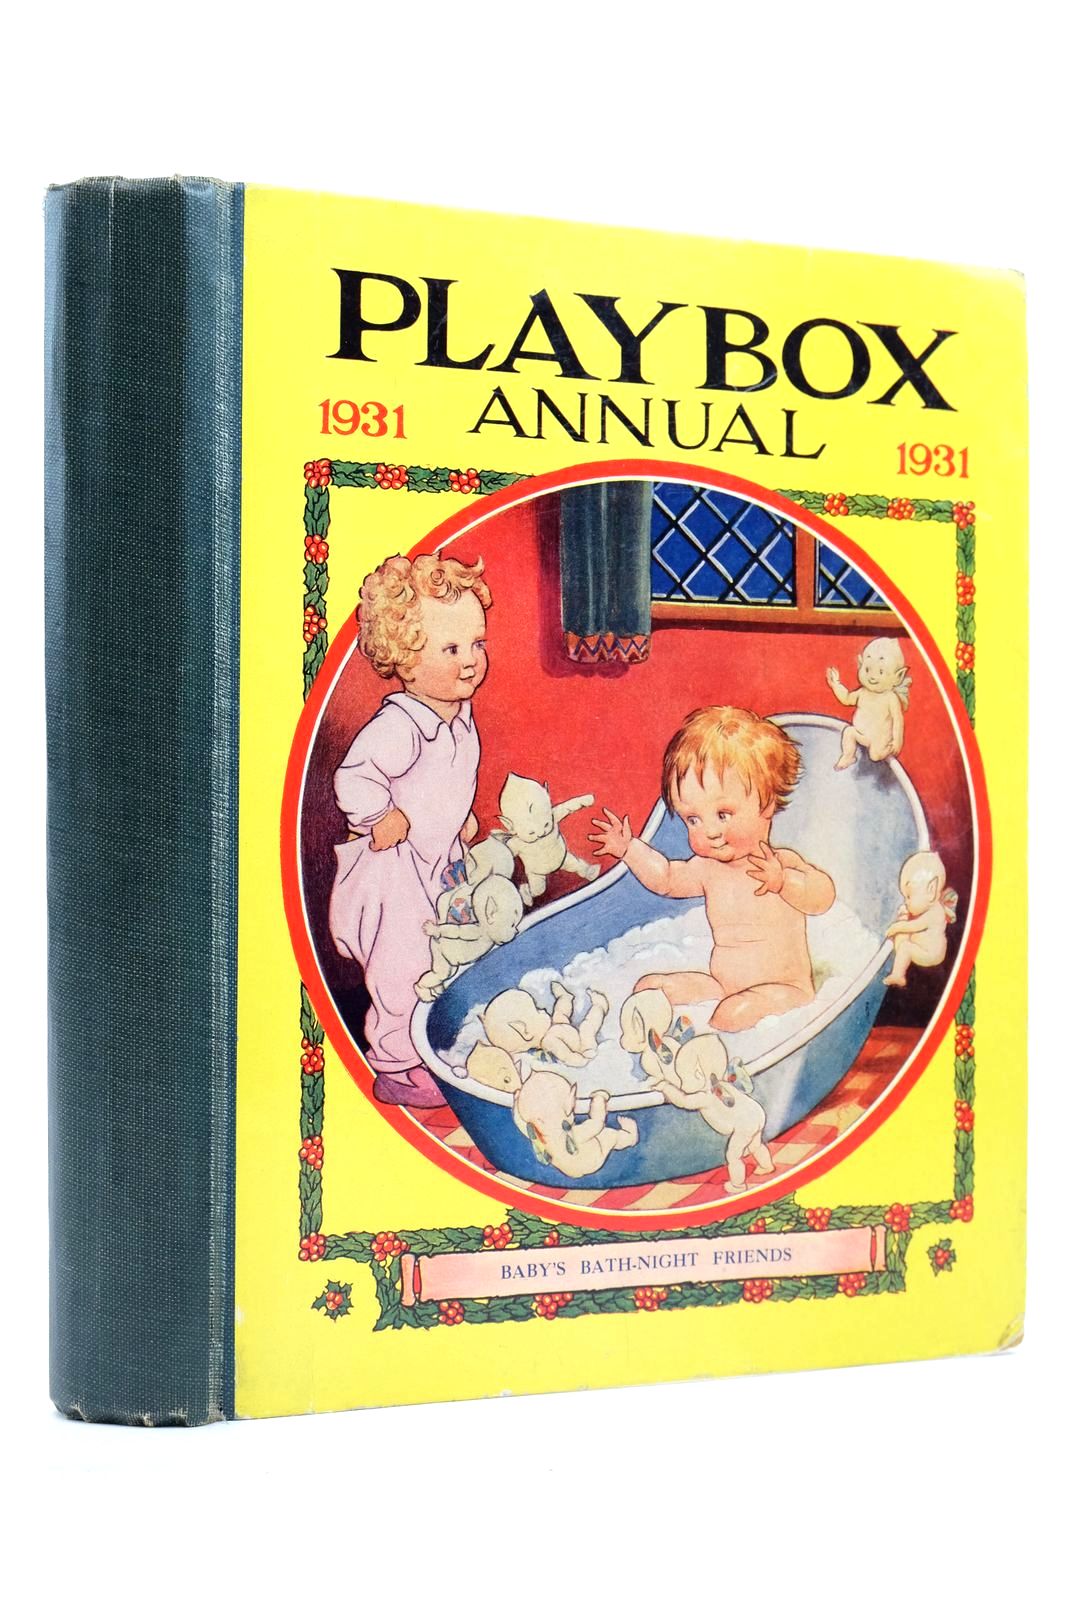 Photo of PLAYBOX ANNUAL 1931 published by The Amalgamated Press (STOCK CODE: 2139424)  for sale by Stella & Rose's Books